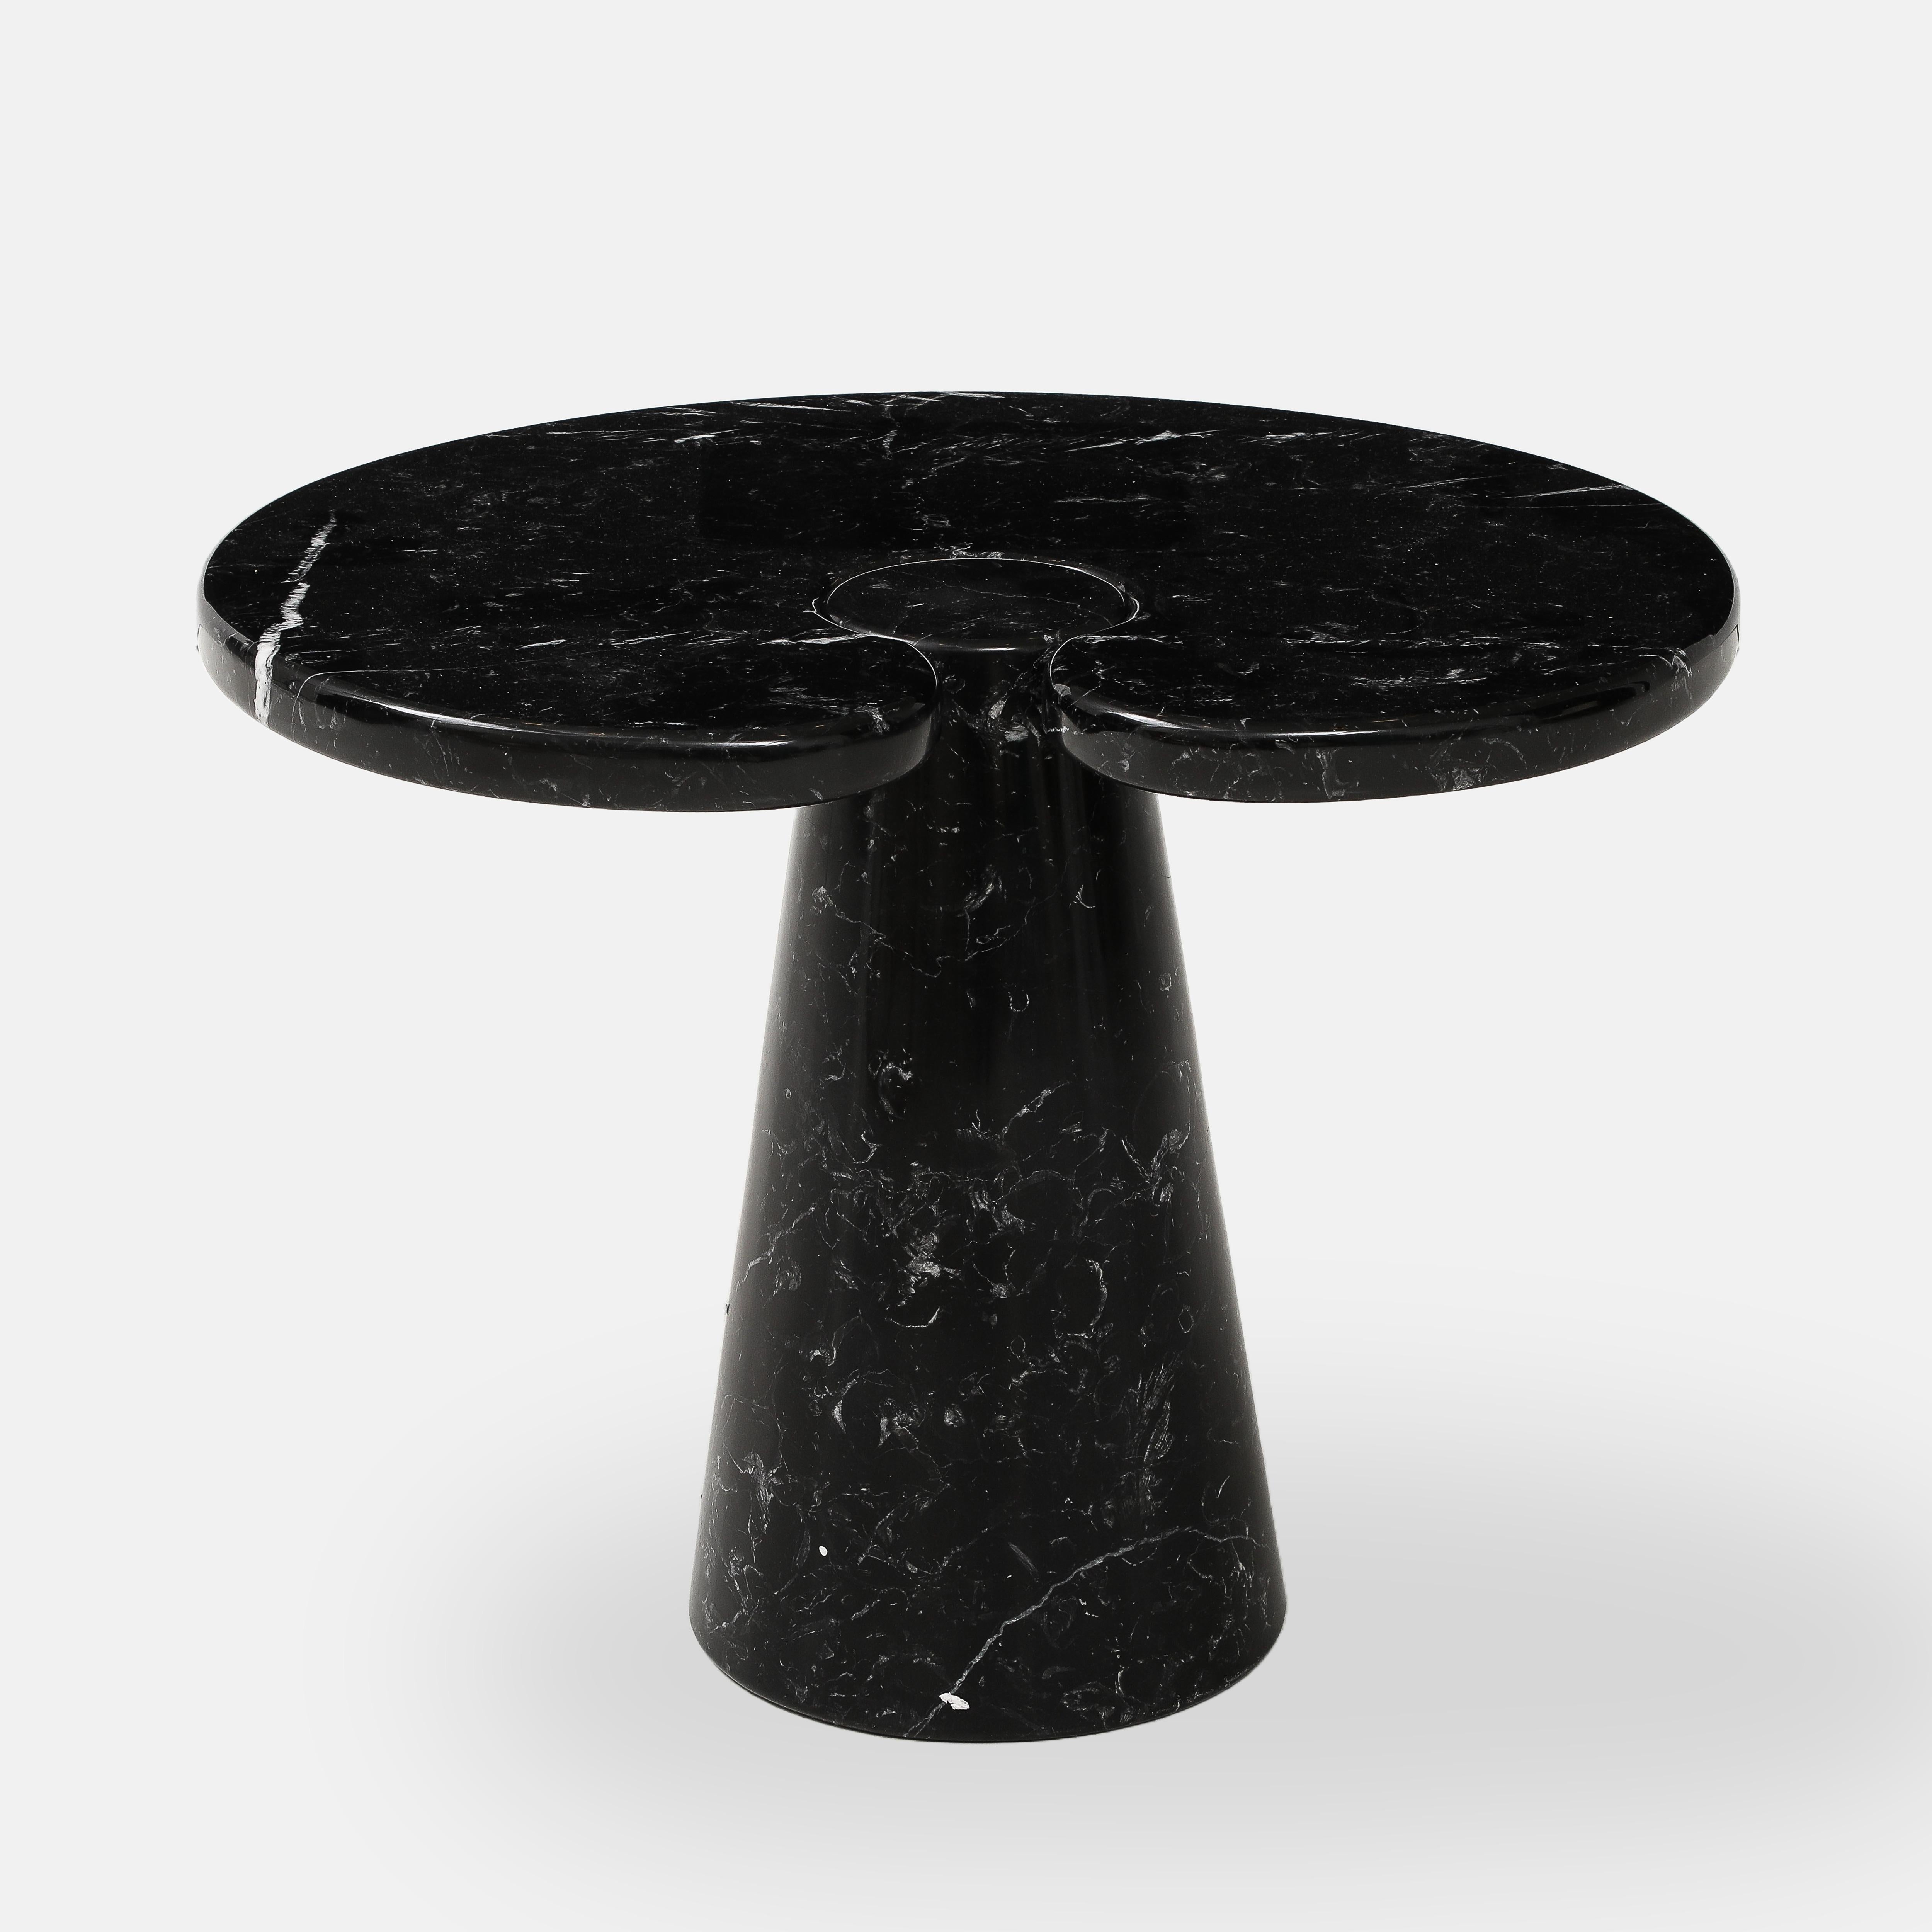 Designed by Angelo Mangiarotti for Skipper from the Eros series, Nero Marquina or black marble side table with top fitted on conical base. This elegantly organic table has beautiful subtle veining throughout. Original Skipper label on underside. As